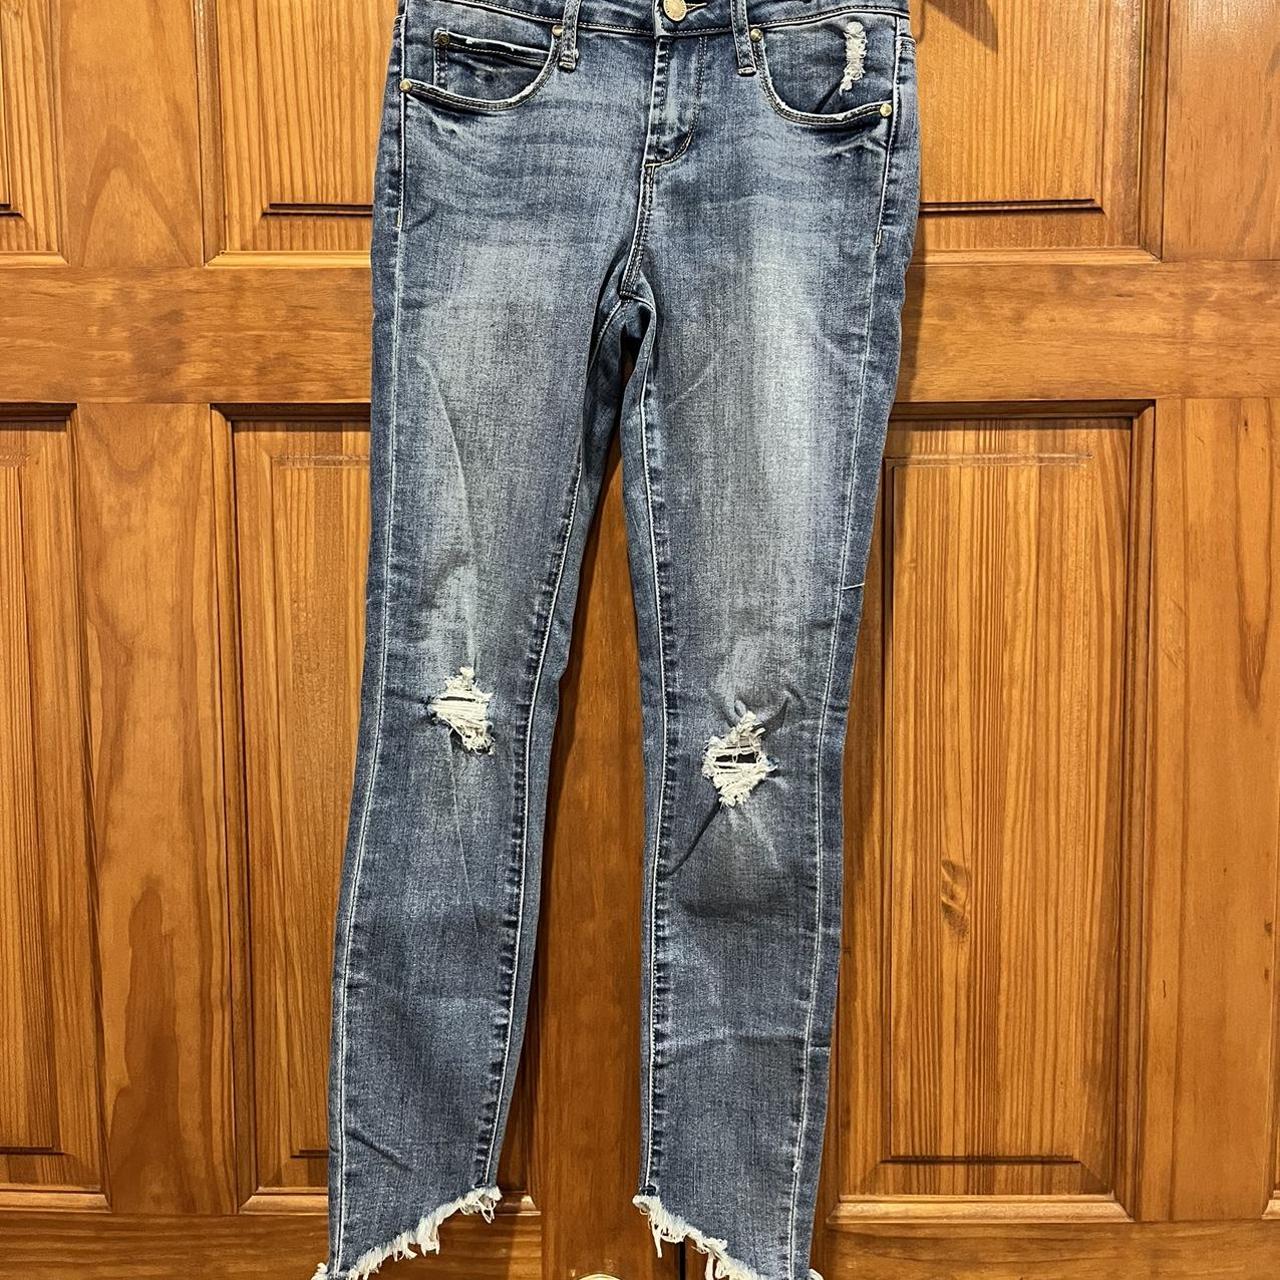 Articles of Society Women's Jeans